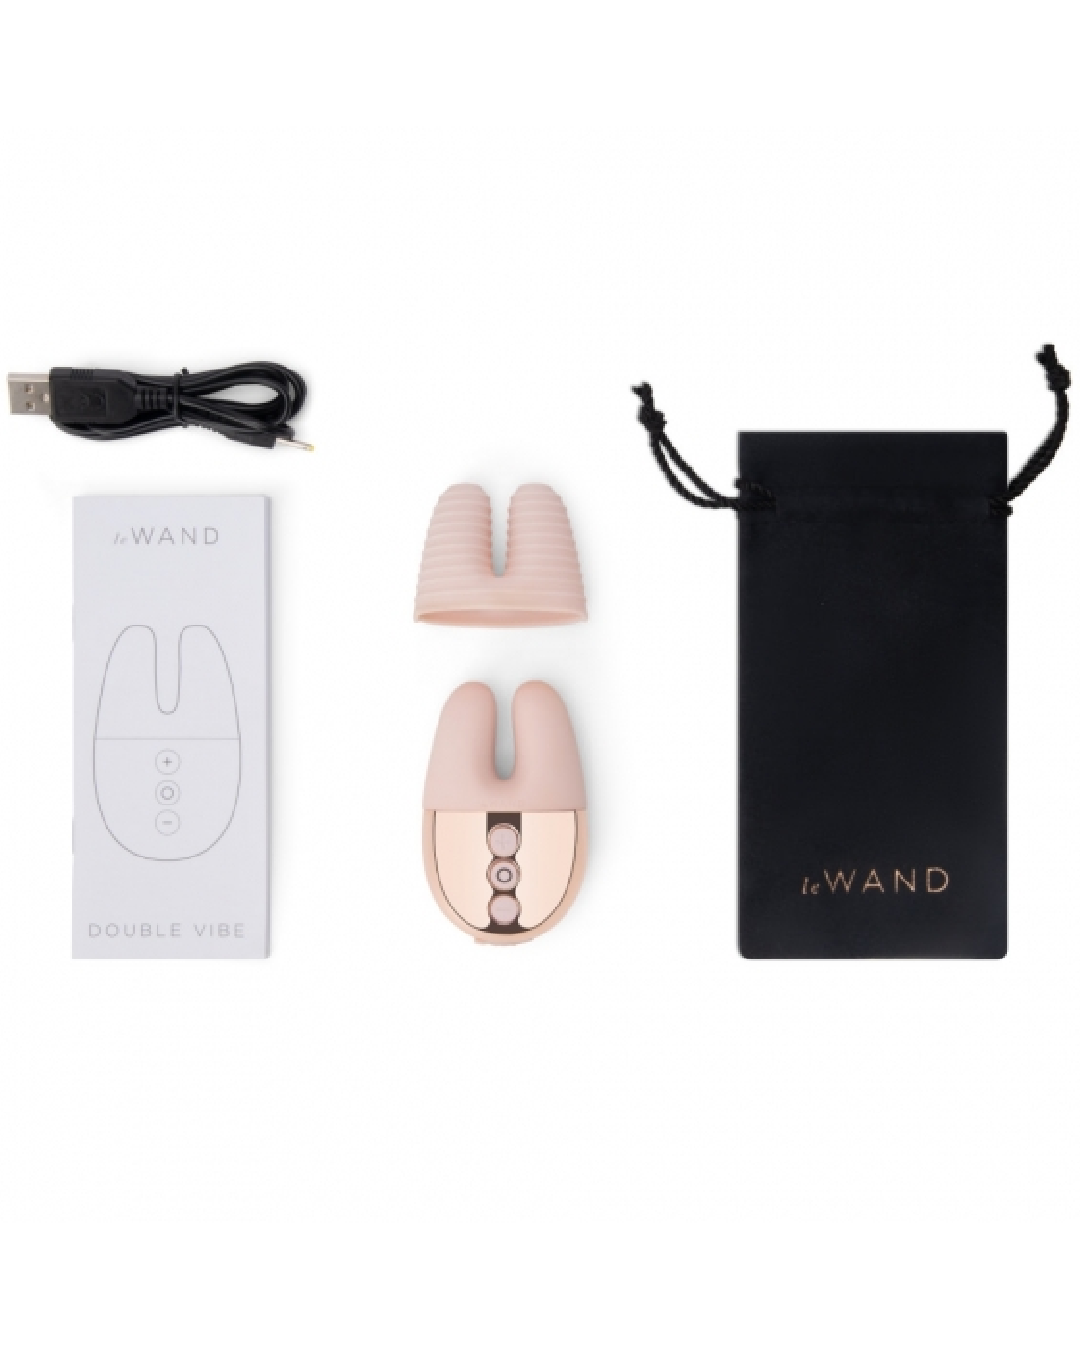 Le Wand Chrome Double Vibrator - Rose Gold showing contents with pouch vibe charger and manual 